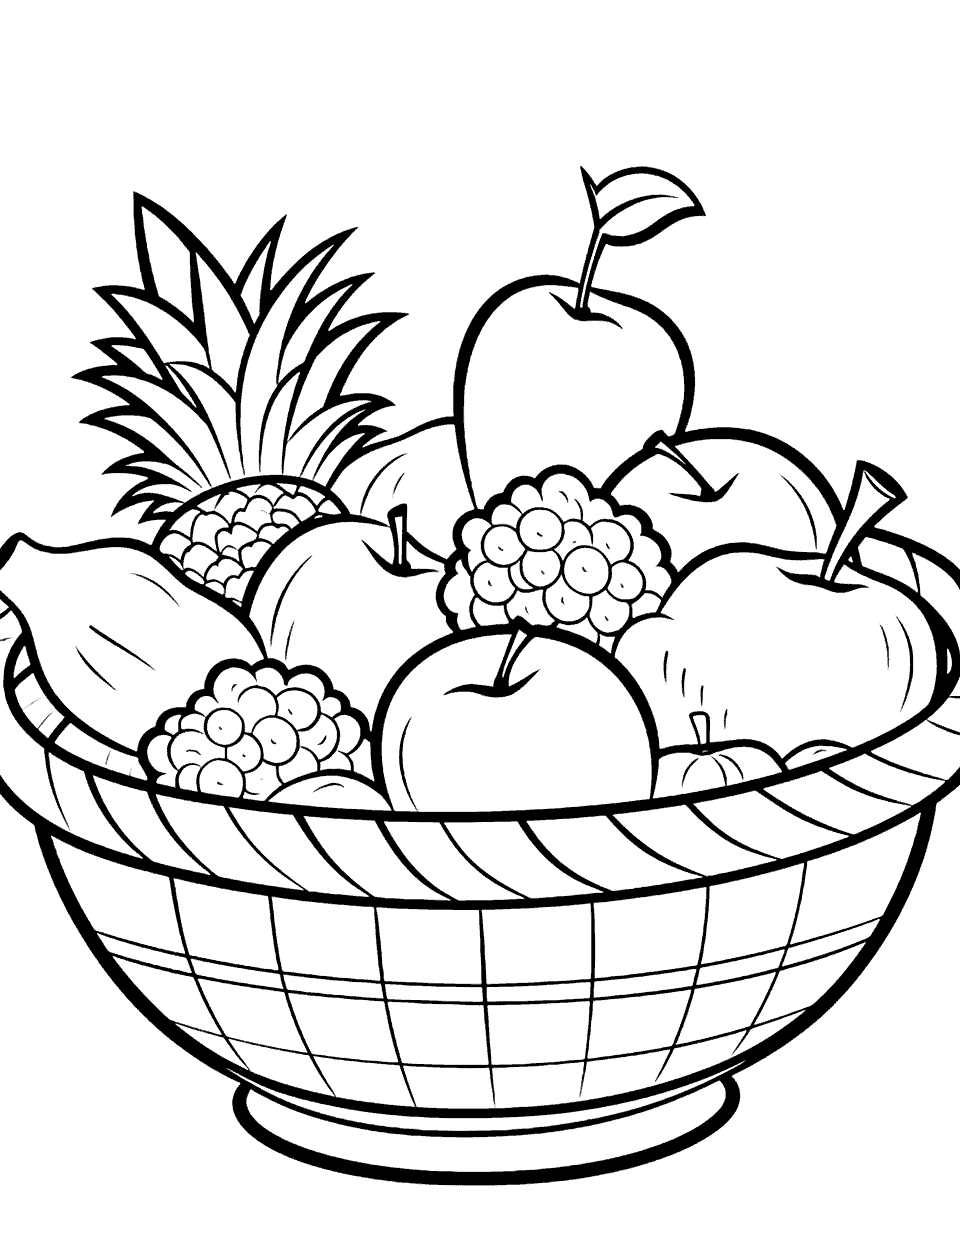 Kawaii Fruit Basket Cute Coloring Page - A basket filled with various cute fruits like apples, oranges, grapes, and pineapples.